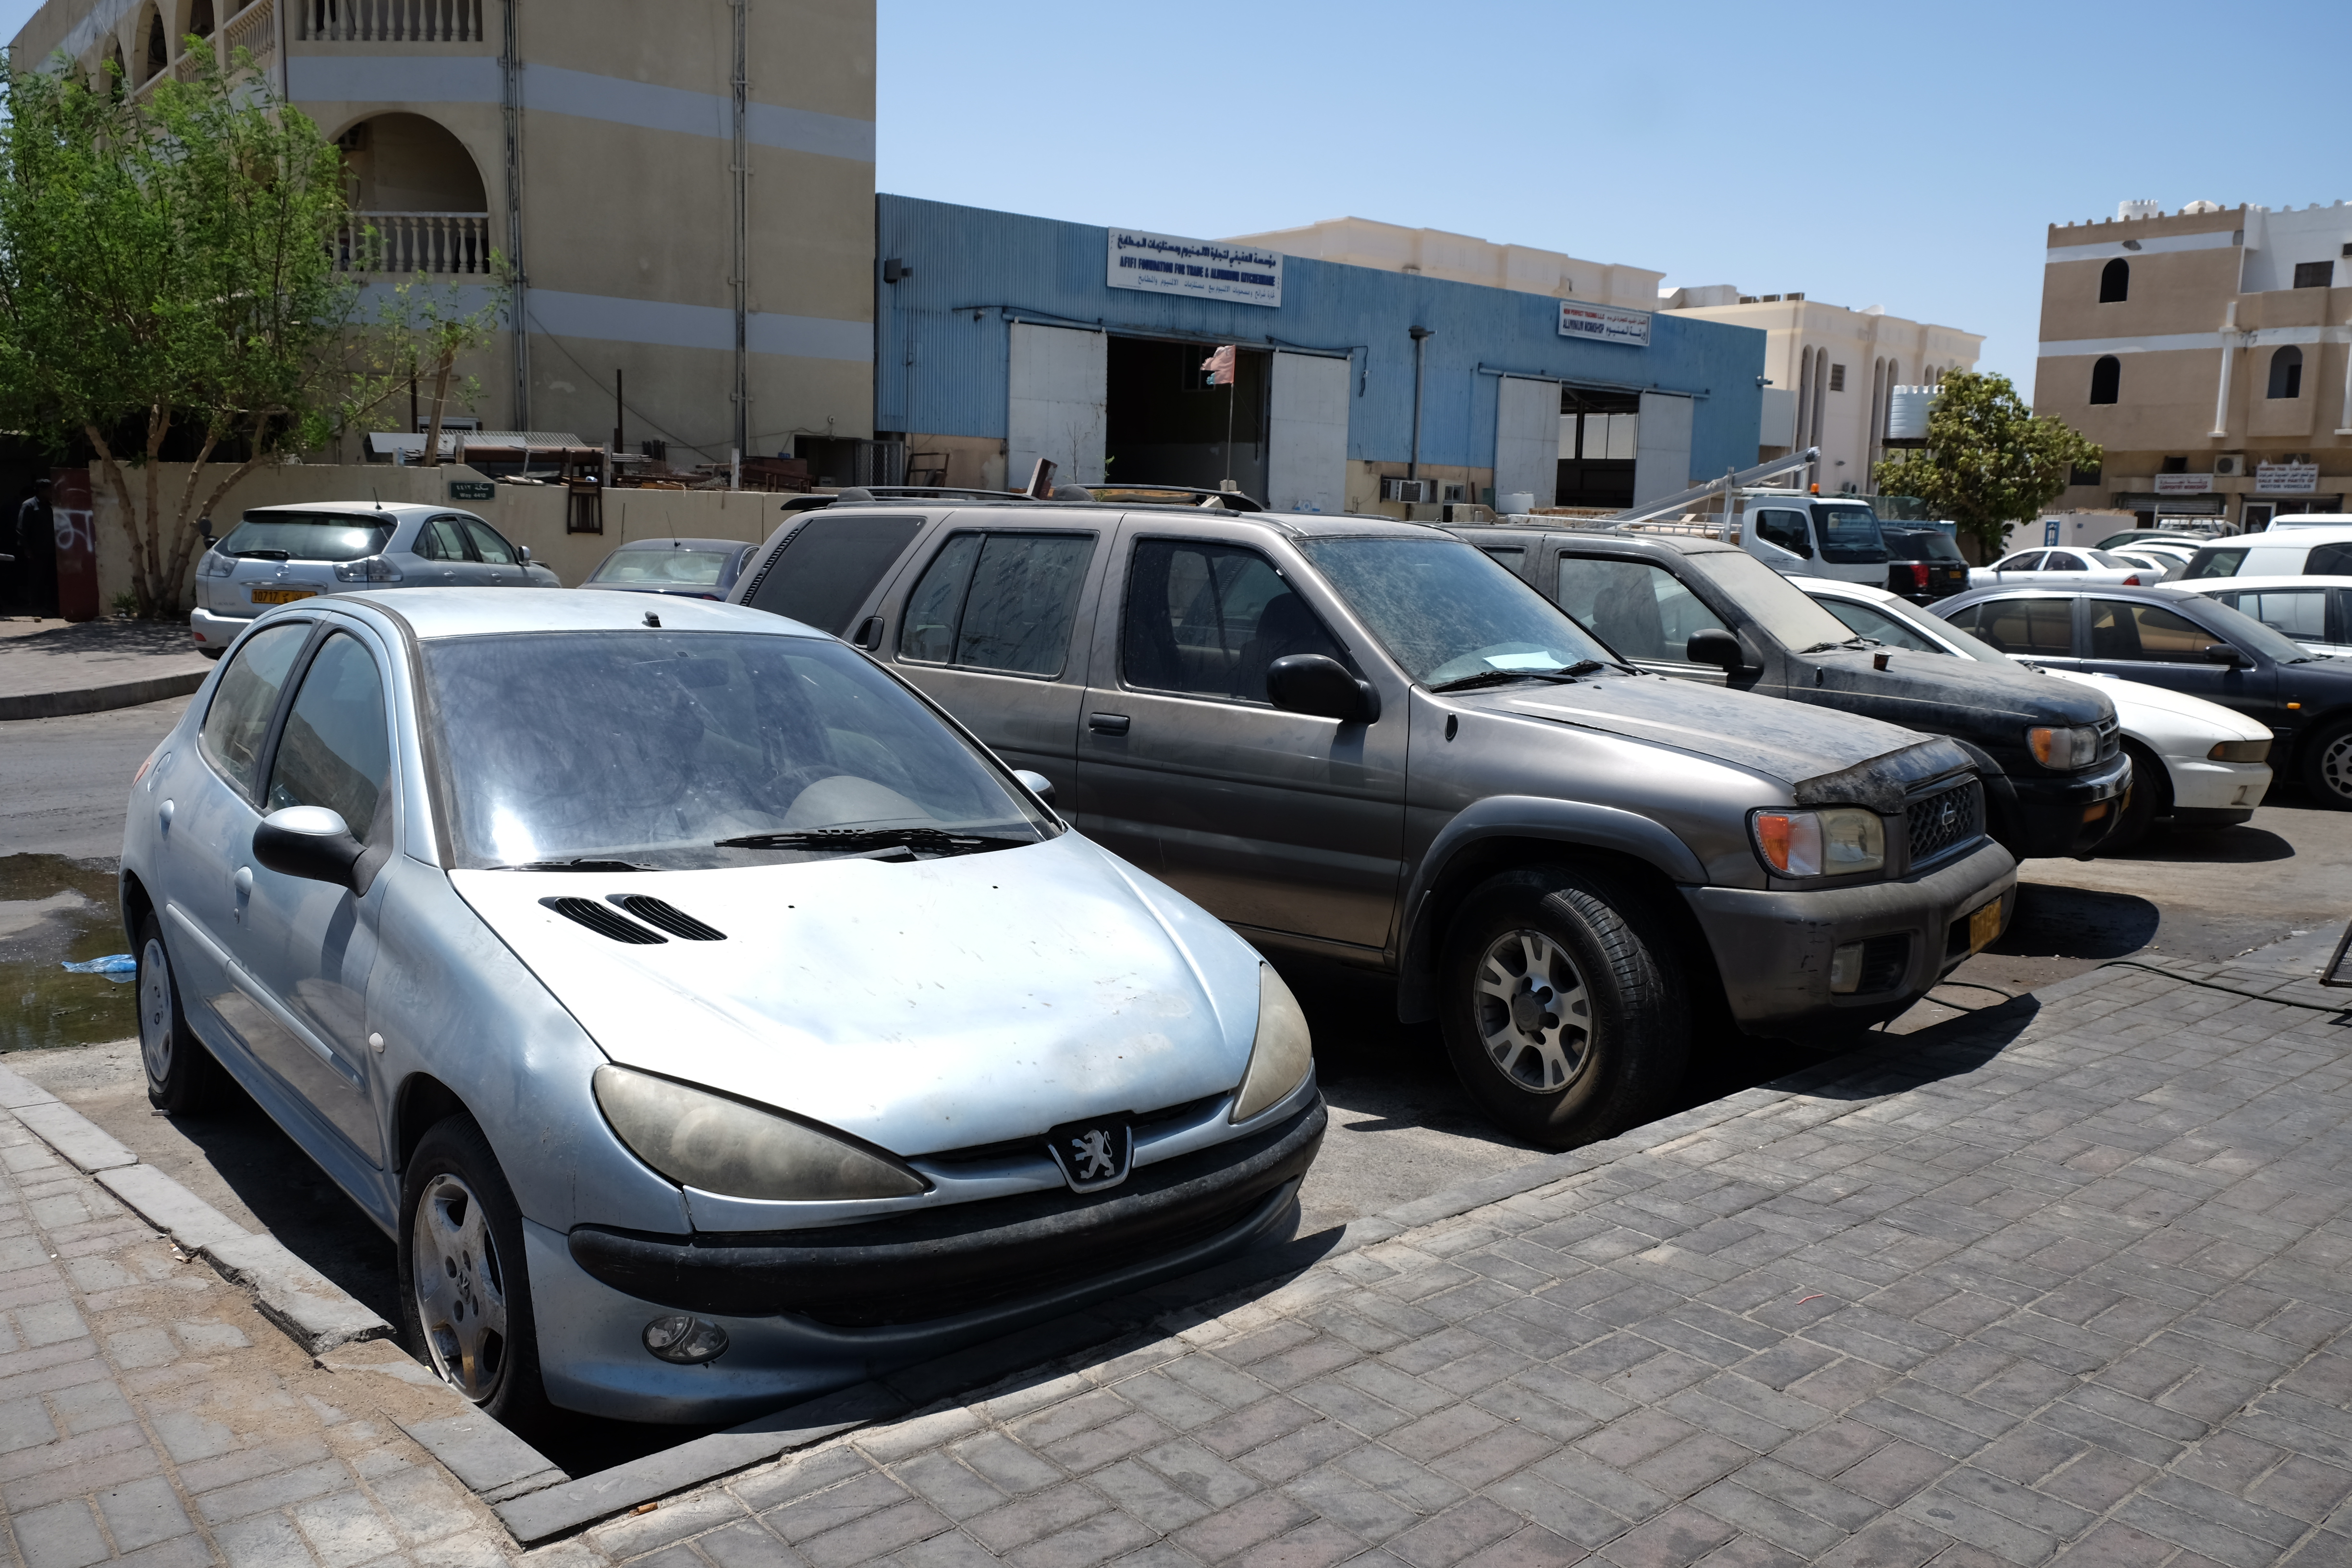 Municipality to levy heavy fines on owners of abandoned vehicles